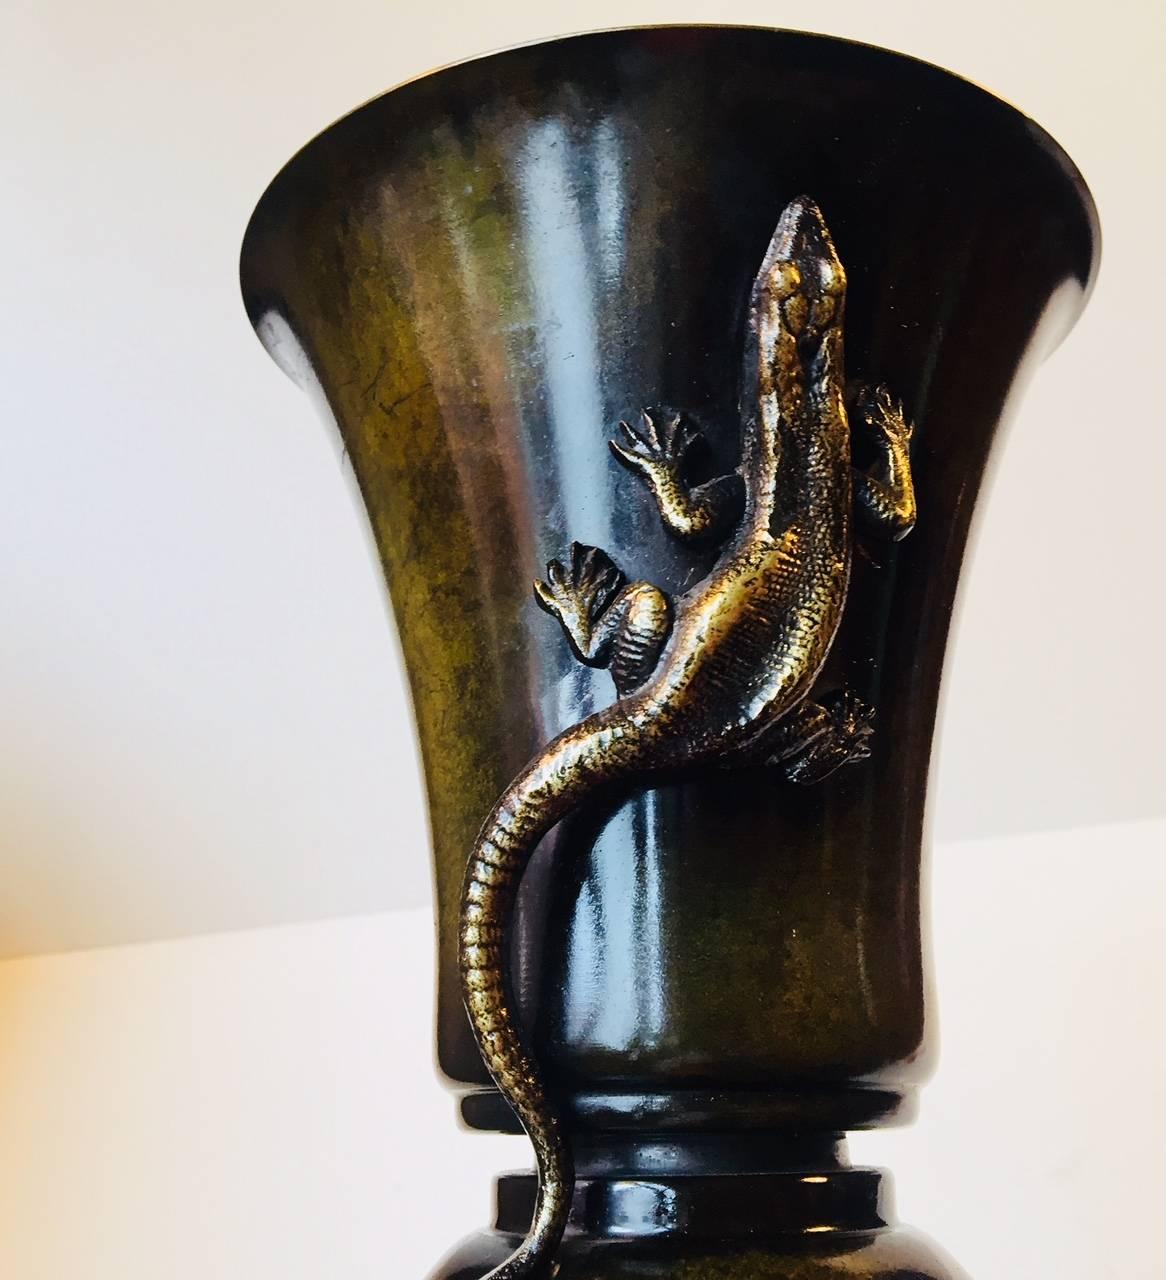 Danish 1930s interpretation of Japanese Meiji period where snakes, lizards and crocodiles were configured upon organically shaped and rather
'modernistic' bronze vases and bowls. This vase was designed and manufactured by H. F Bronce in Denmark